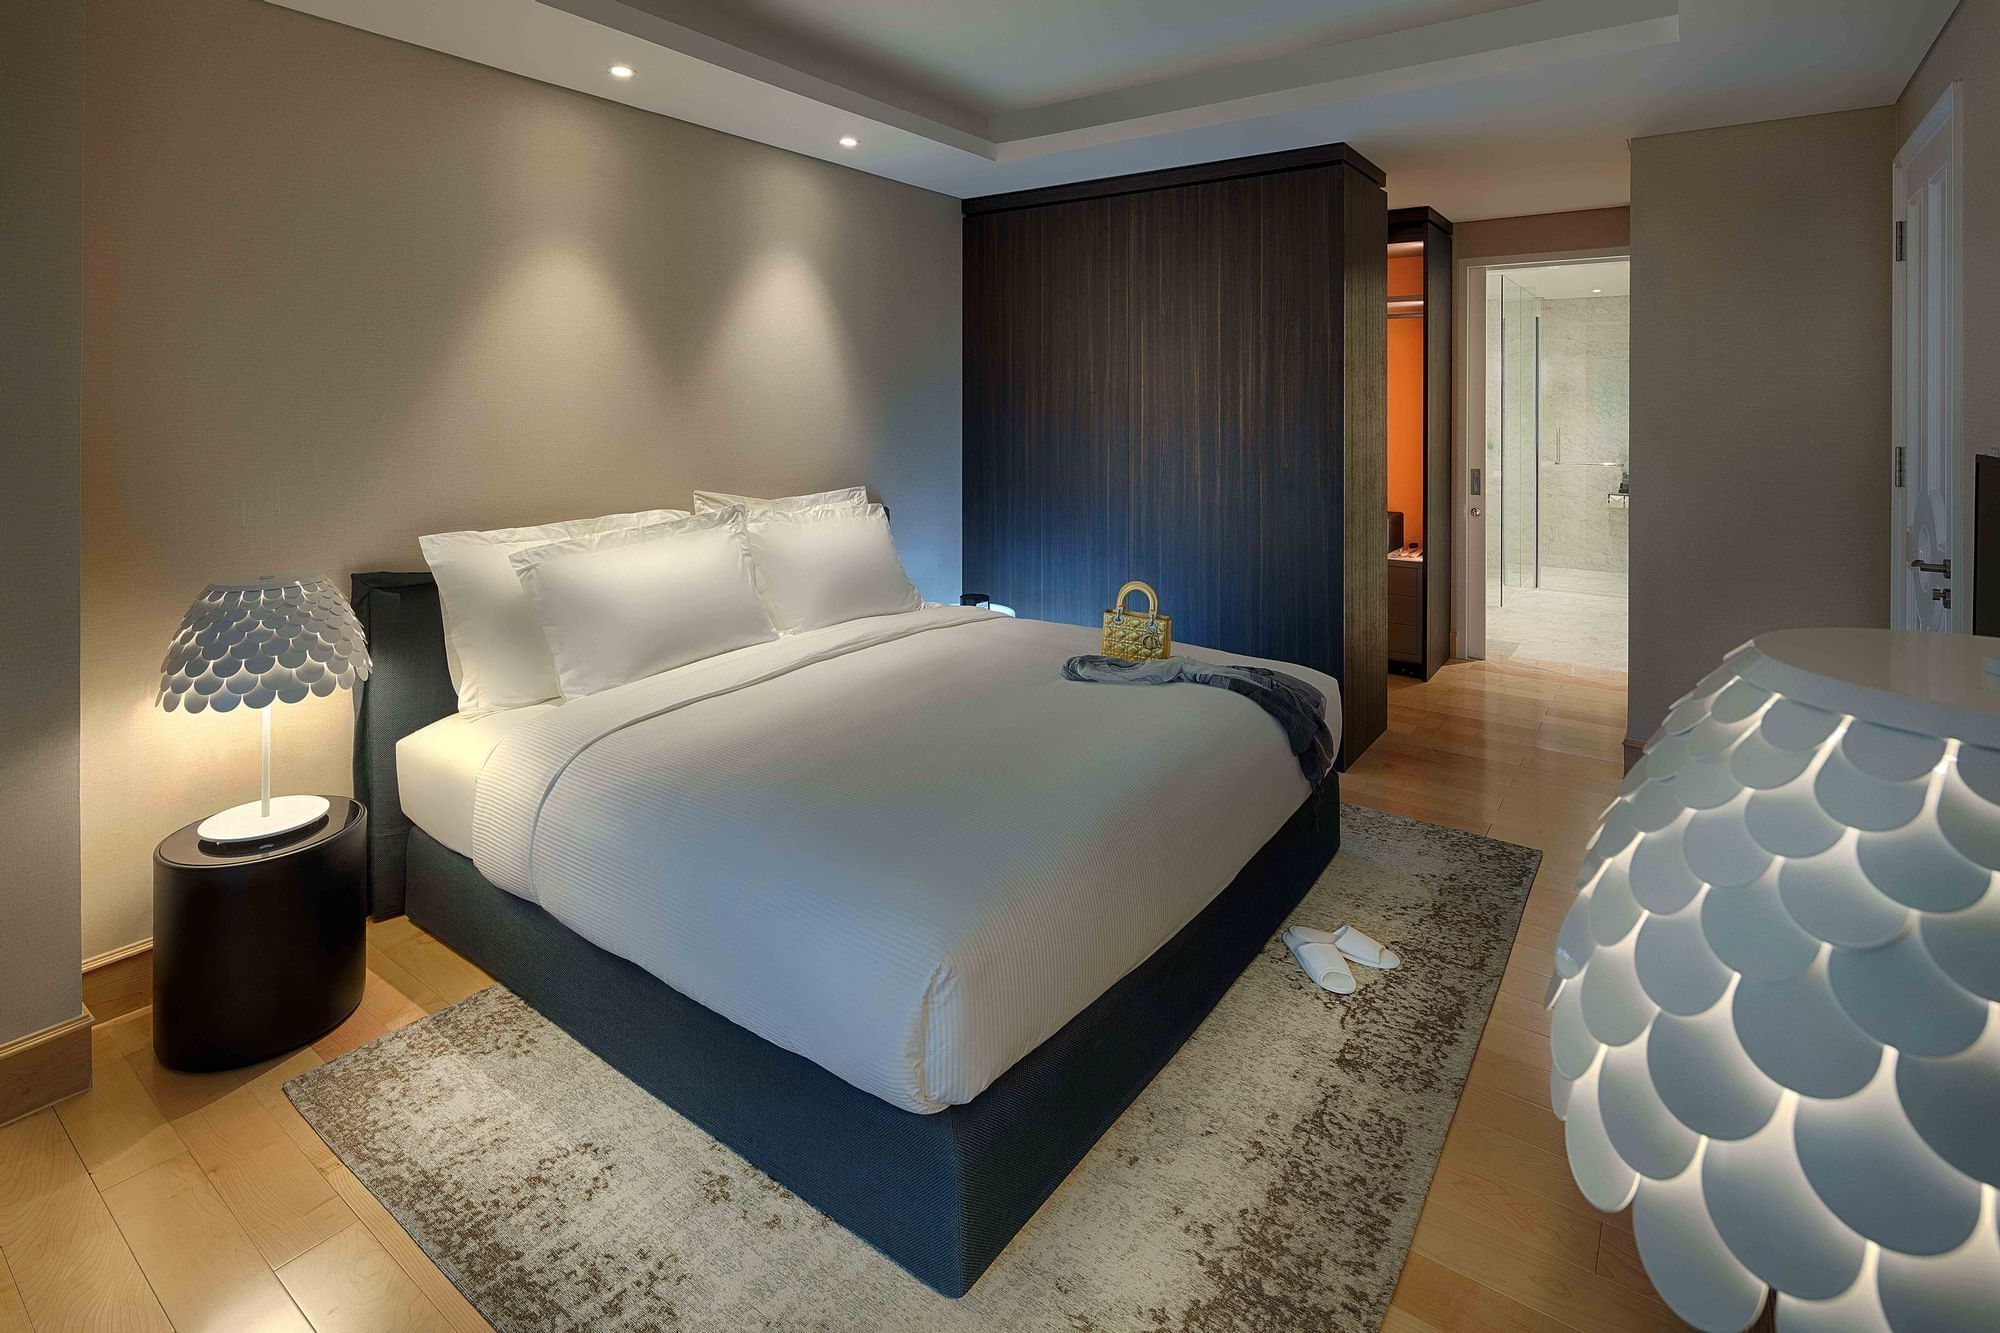 HOTEL SHERWOOD SUITES HO CHI MINH CITY 5* (Vietnam) - from £ 73 | HOTELMIX